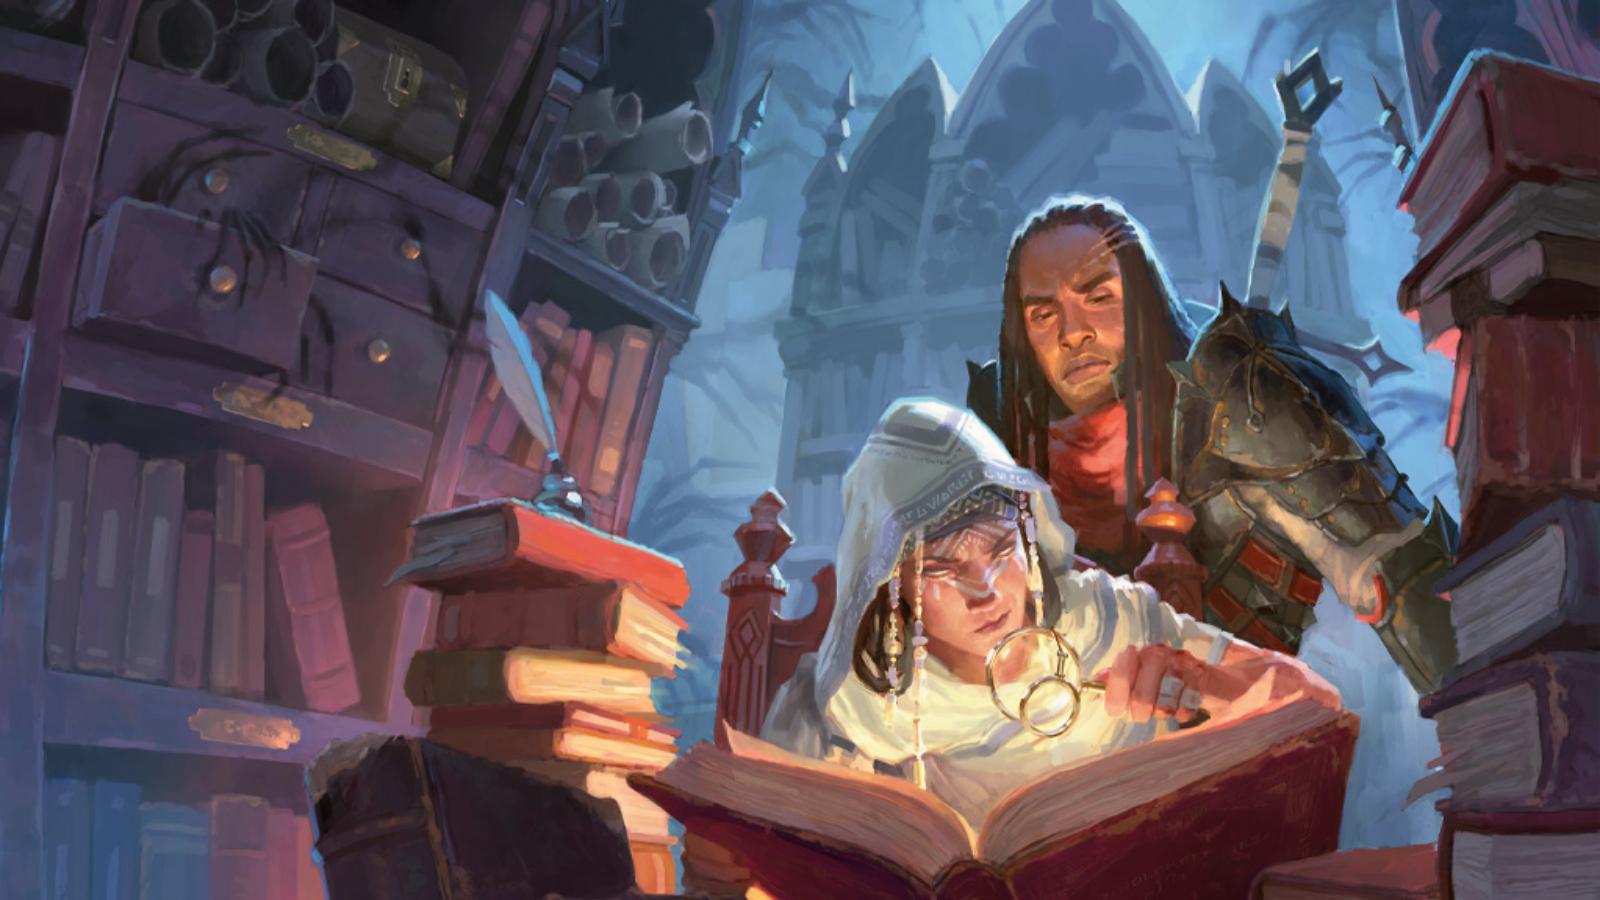 Adventurers search through books in the library of candlekeep